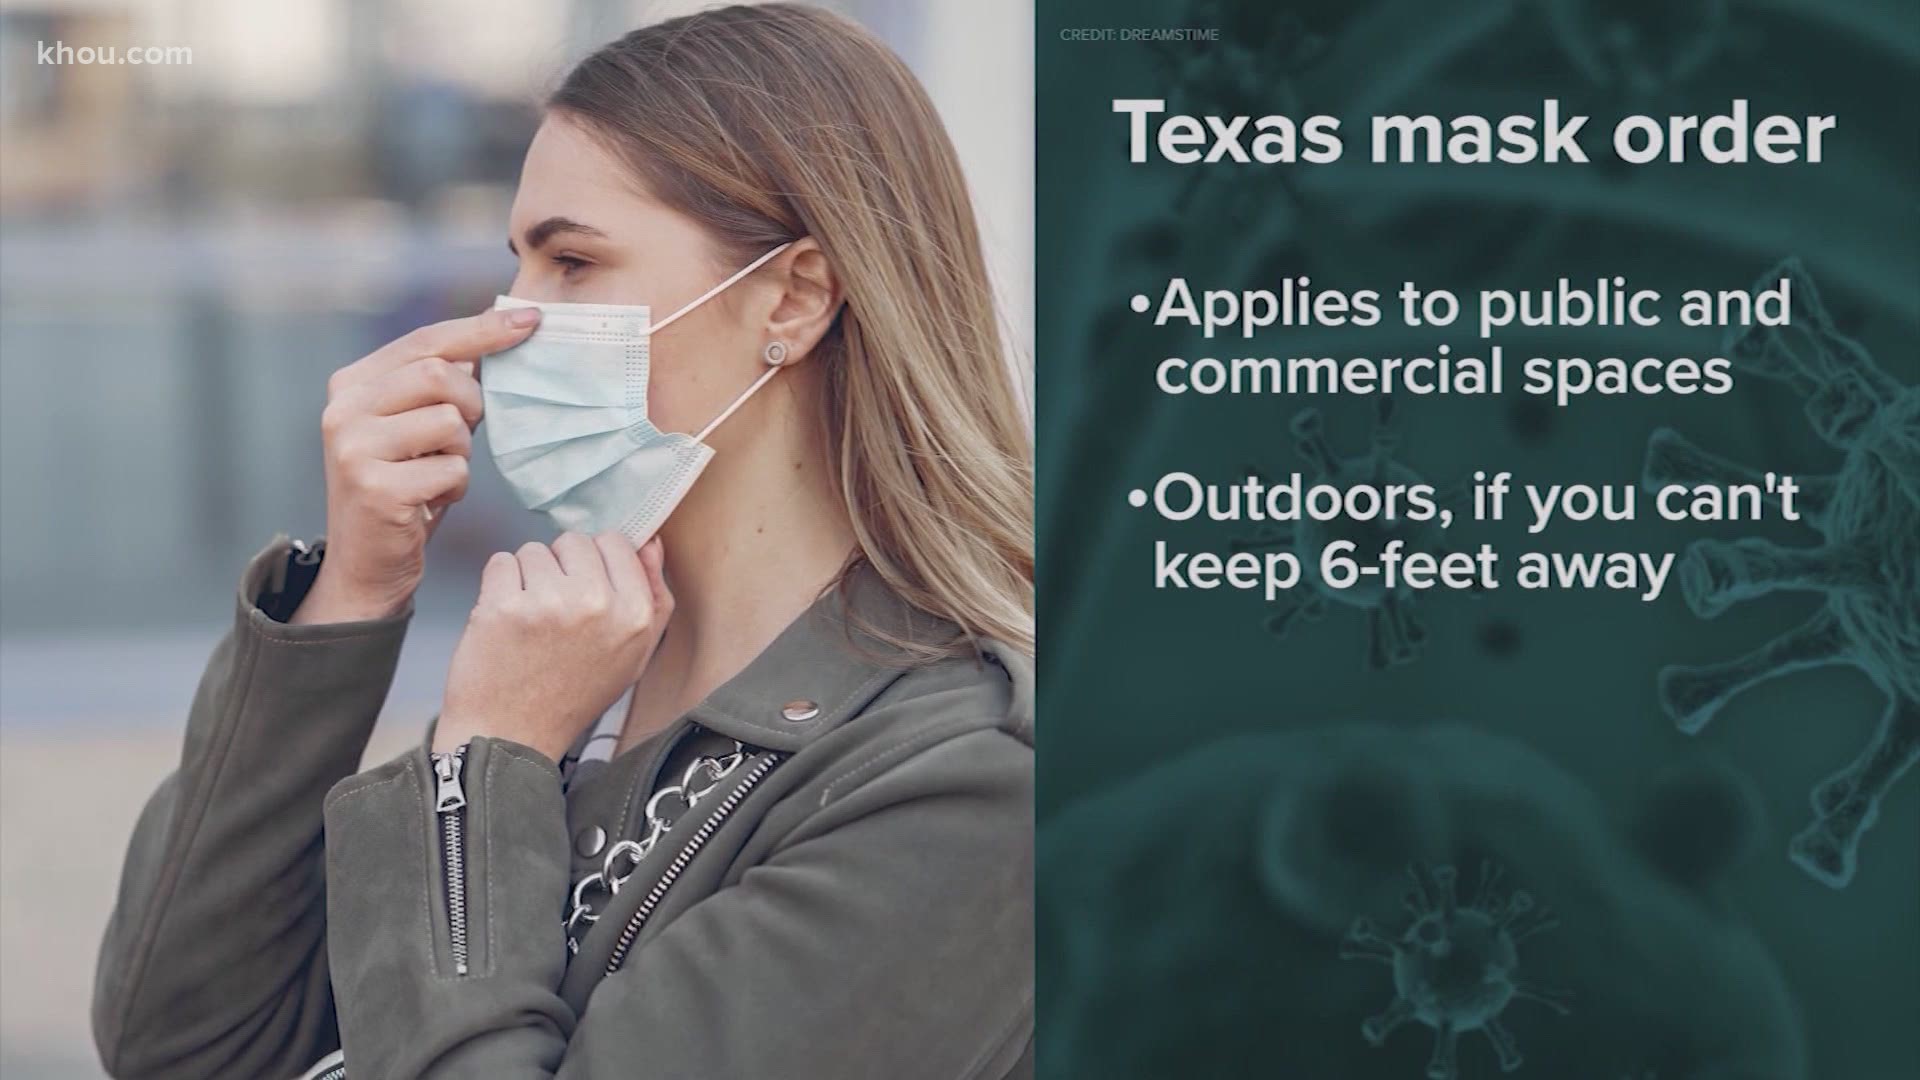 Gov. Abbott has issued a state-mandated mask order that requires residents in counties with 20 or more COVID-19 cases to wear masks in public.